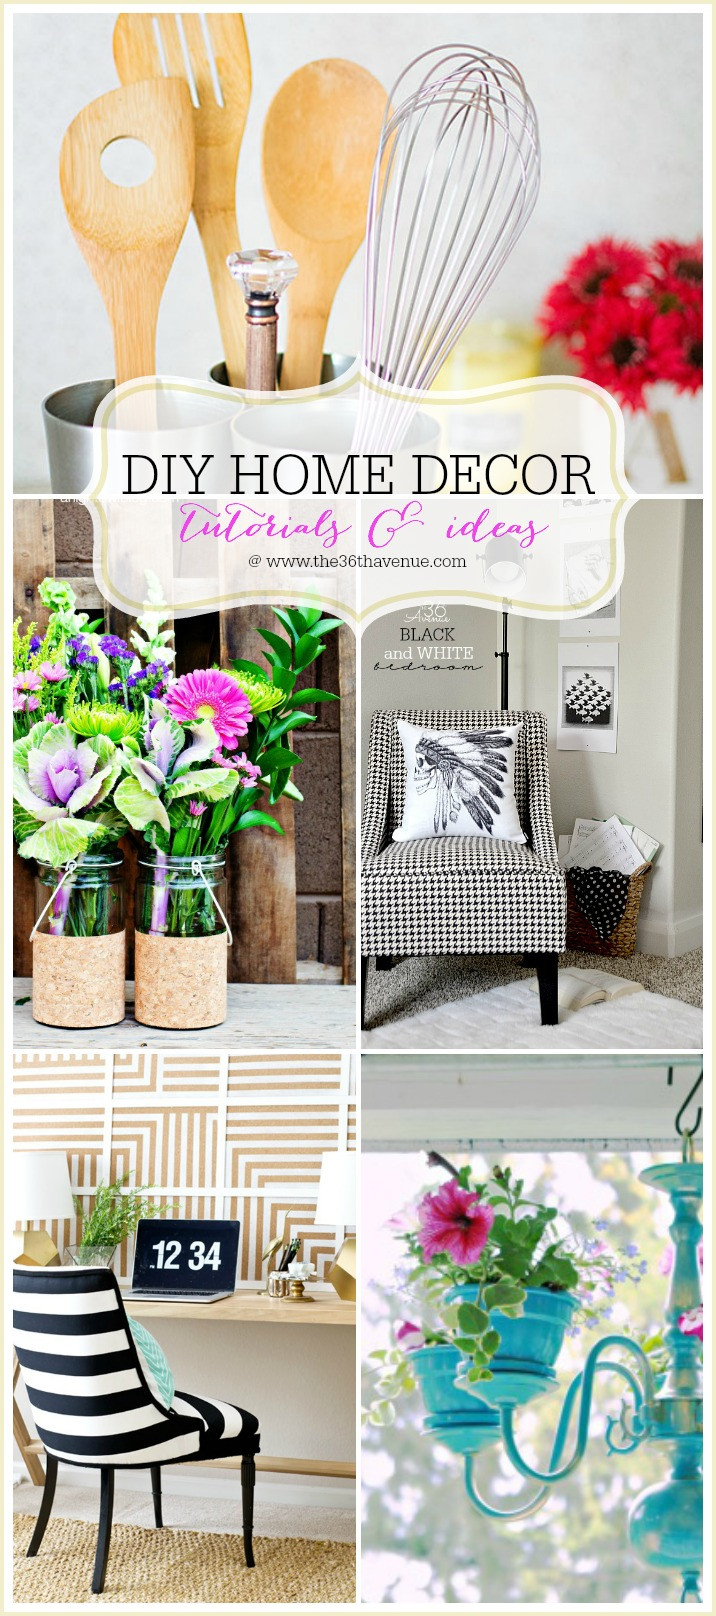 DIY Craft Home Decor
 The 36th AVENUE Home Decor DIY Projects